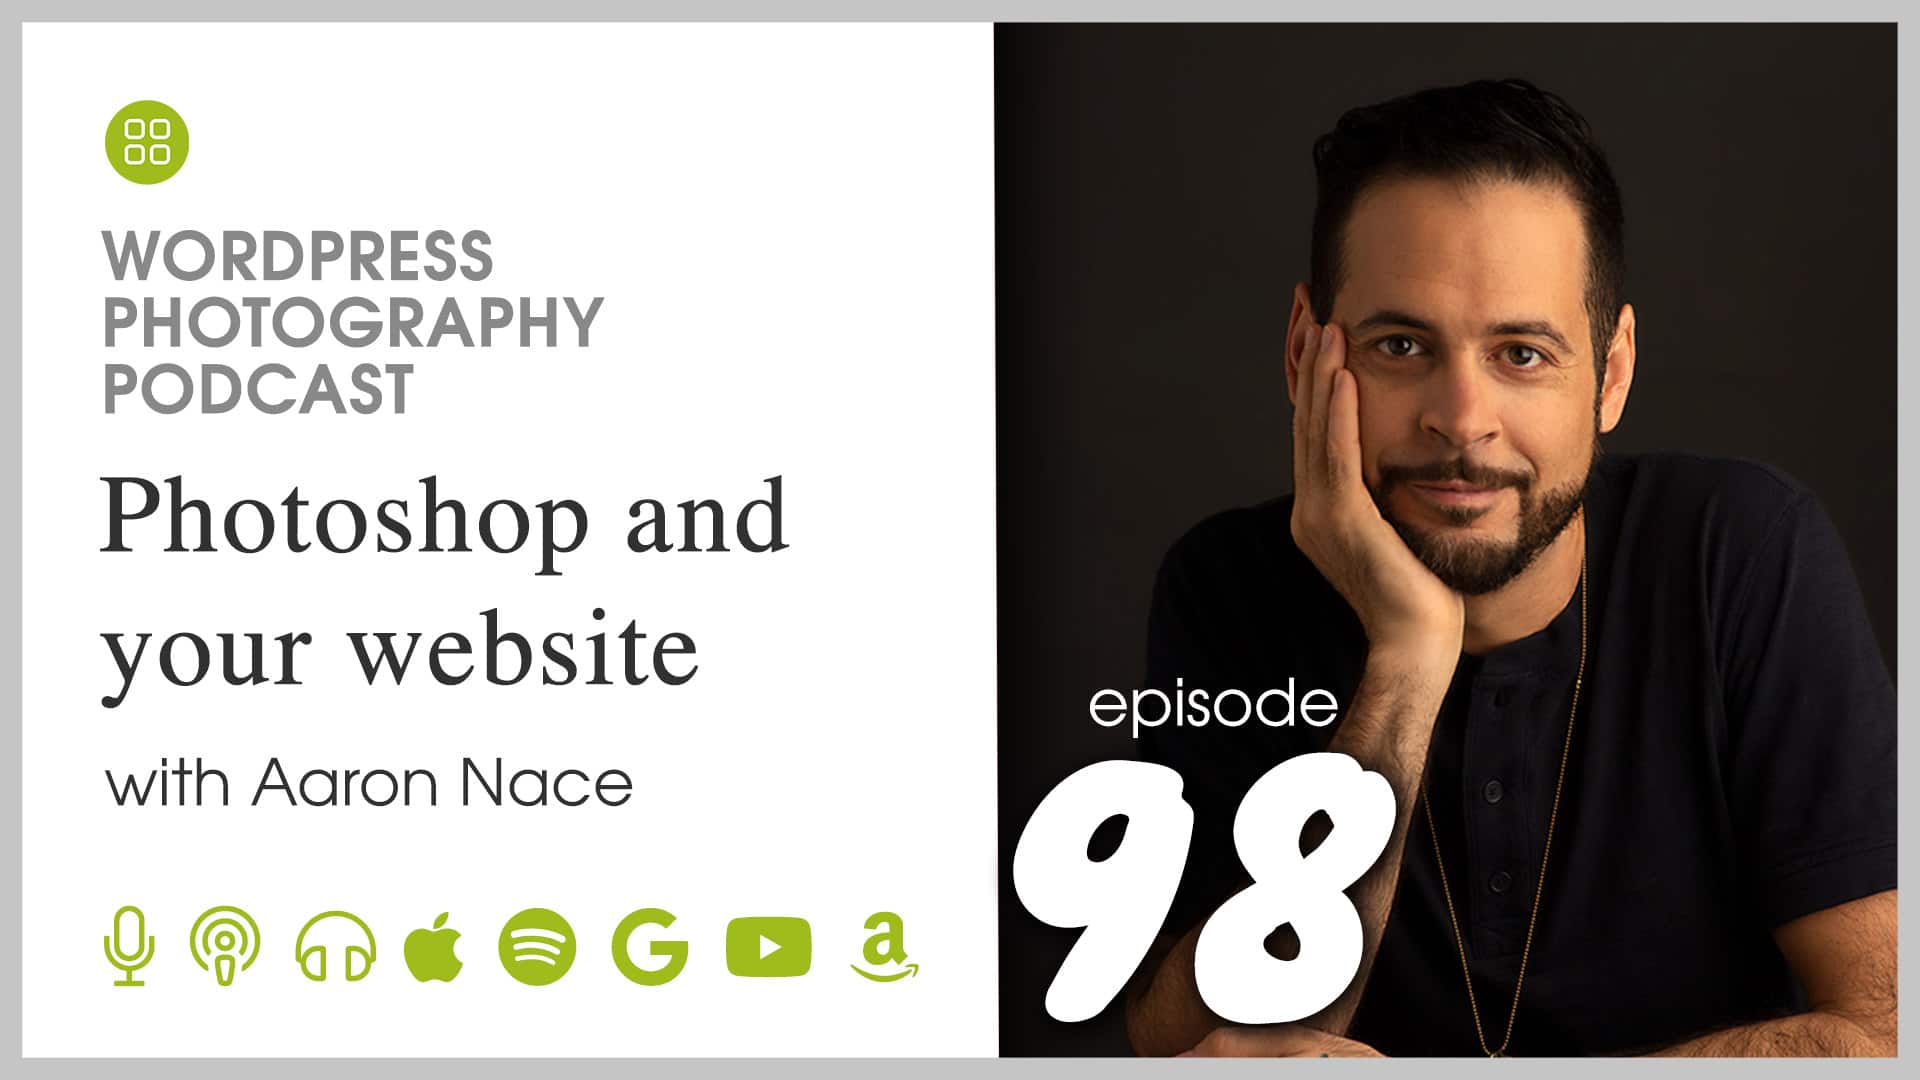 Episode 98 – Photoshop and your website with Aaron Nace